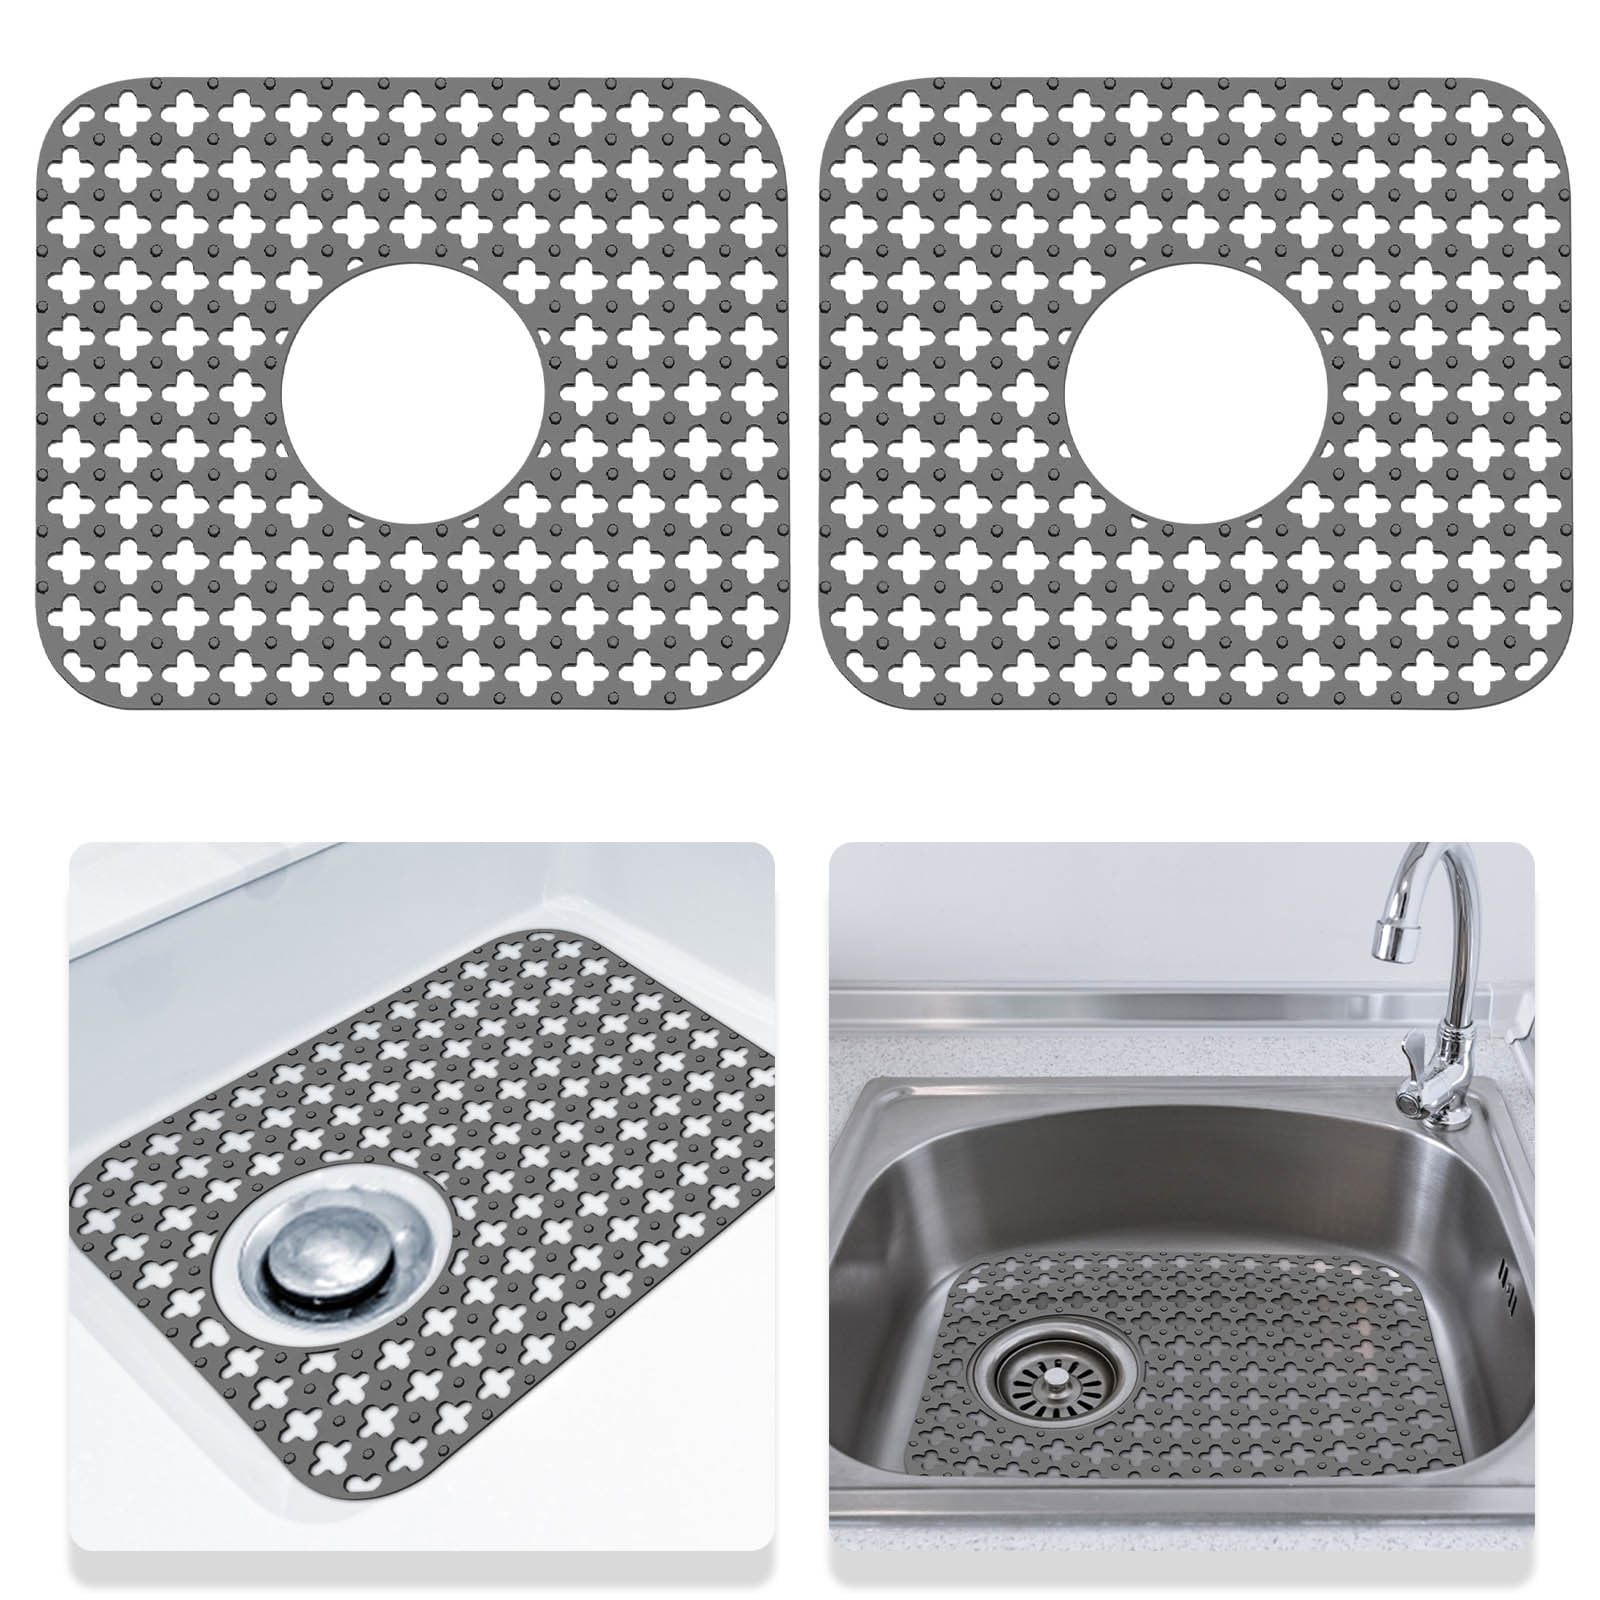 Silicone Sink Mat, Kitchen Sink Protector Folding Heat Resistant Non-slip  For Bottom Of Farmhouse Stainless Steel Porcelain Sink, 13.5 X 13.5''  (purpl